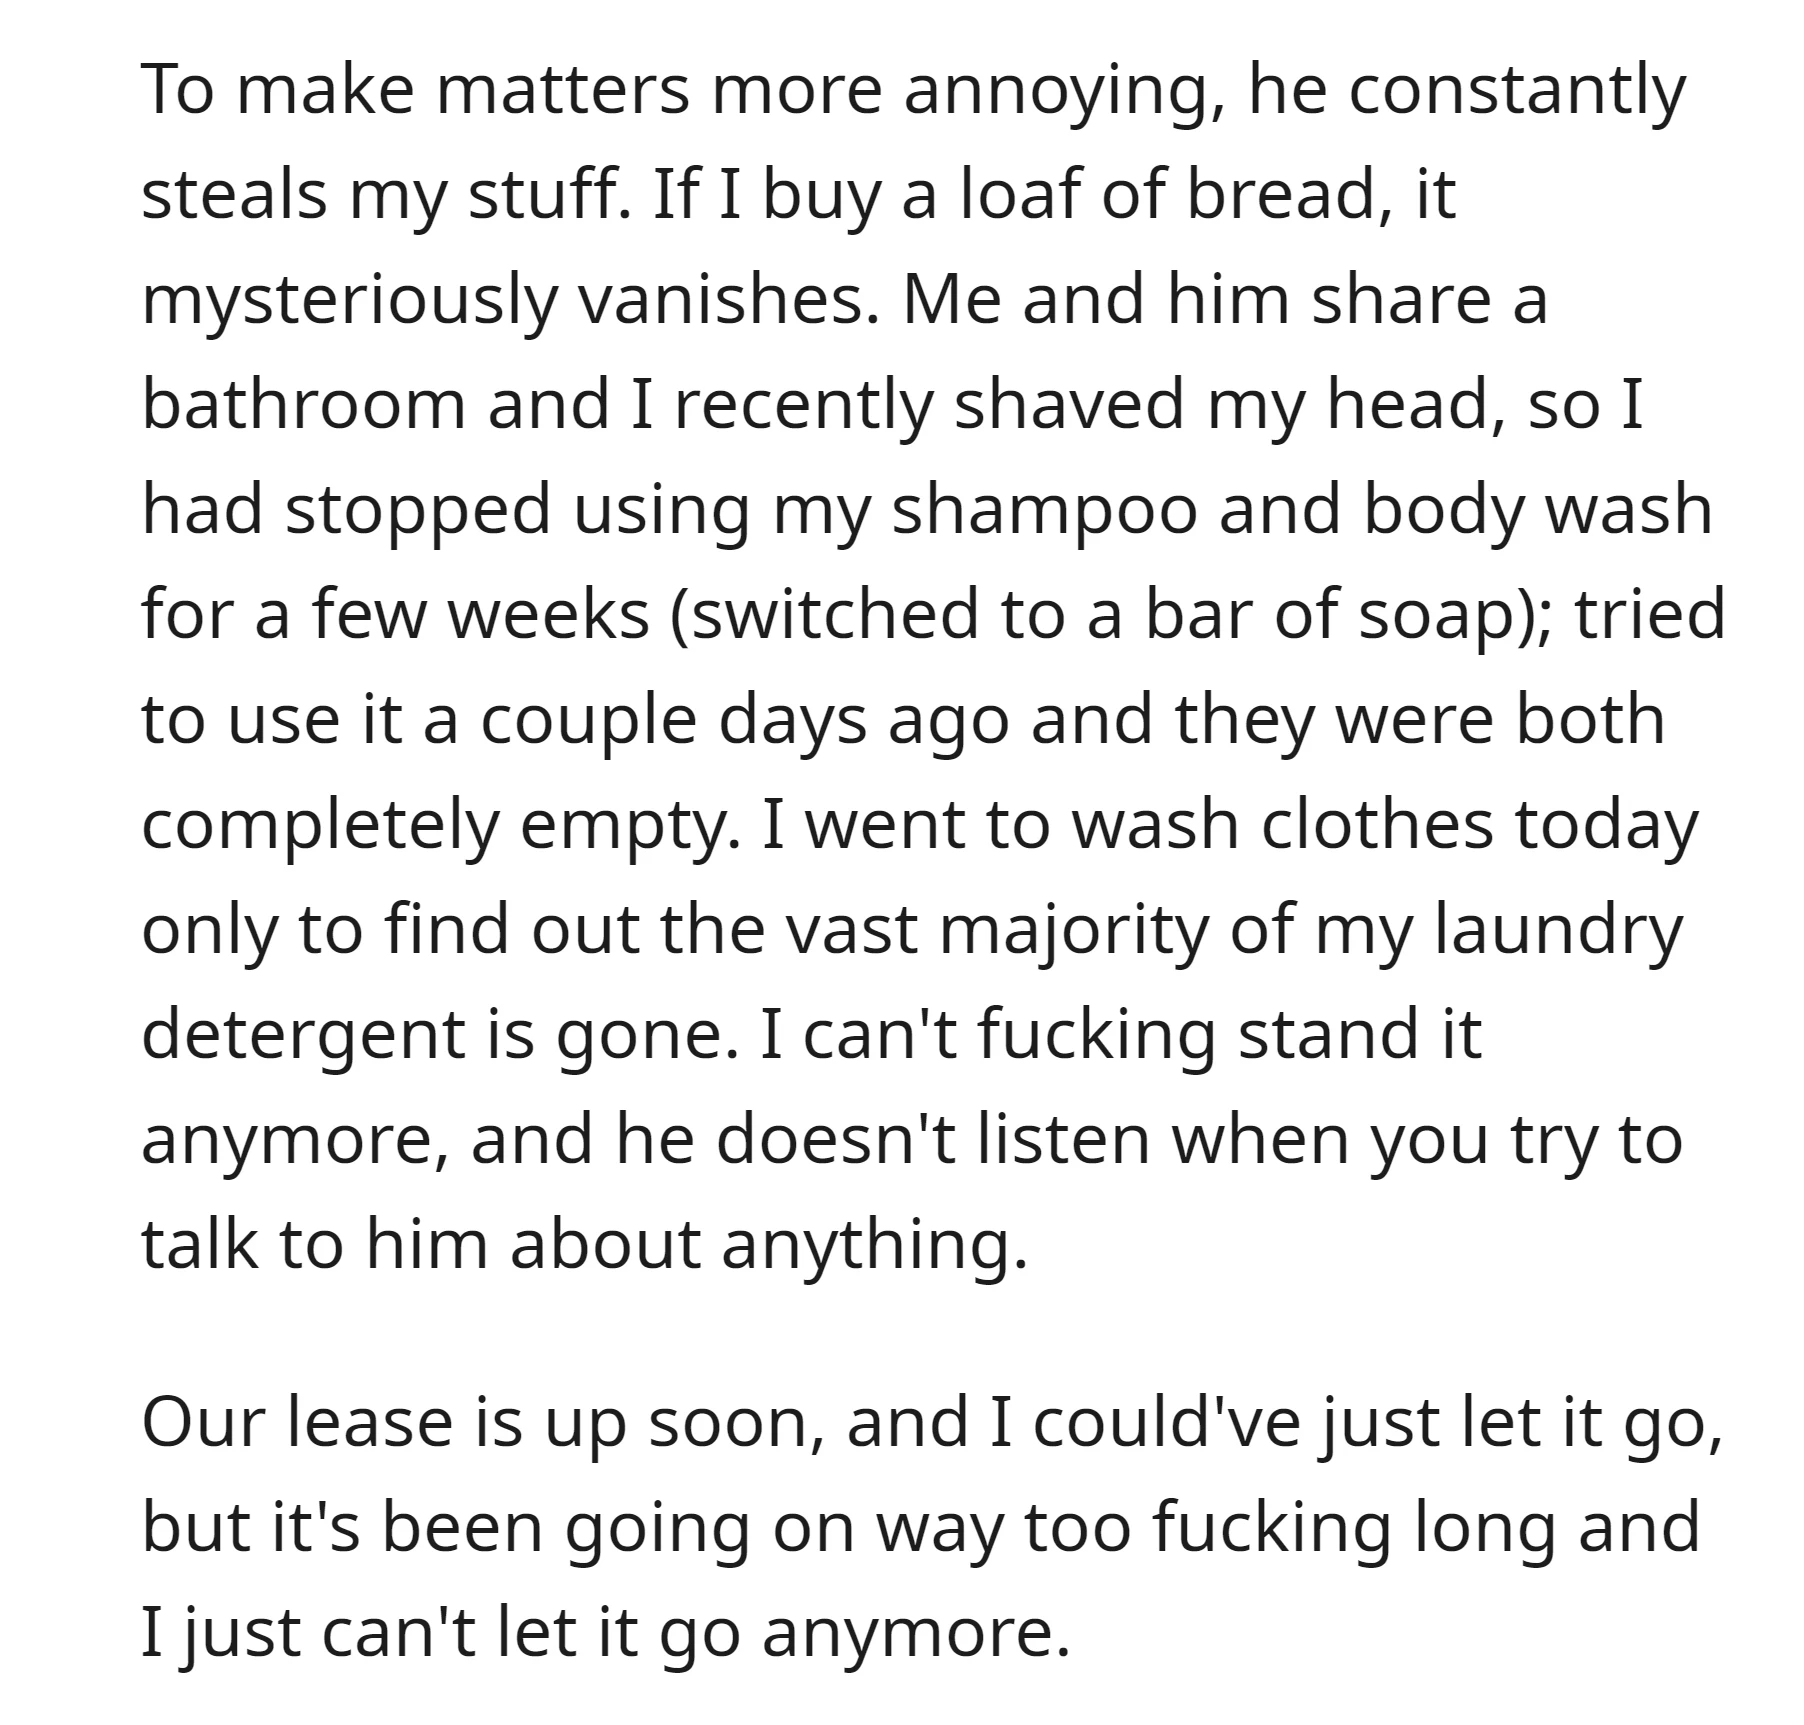 This roommate kept stealing his stuff, prompting the OP to address the issue before the lease ends